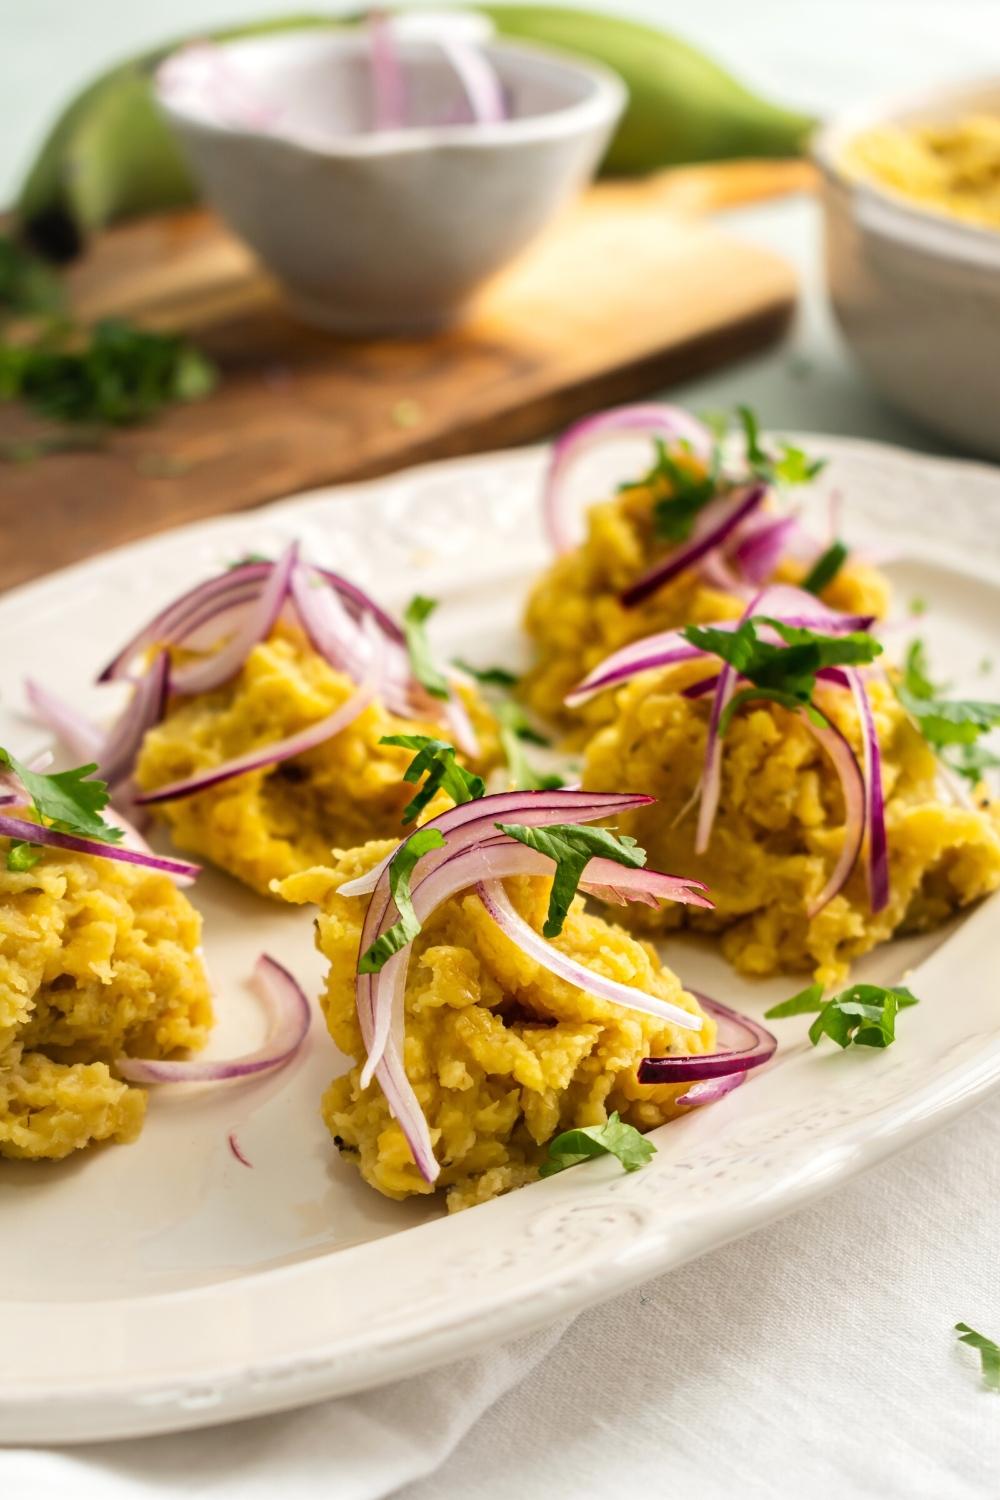 Five clumps of mangu with pickled red onion on top of it on a white plate.